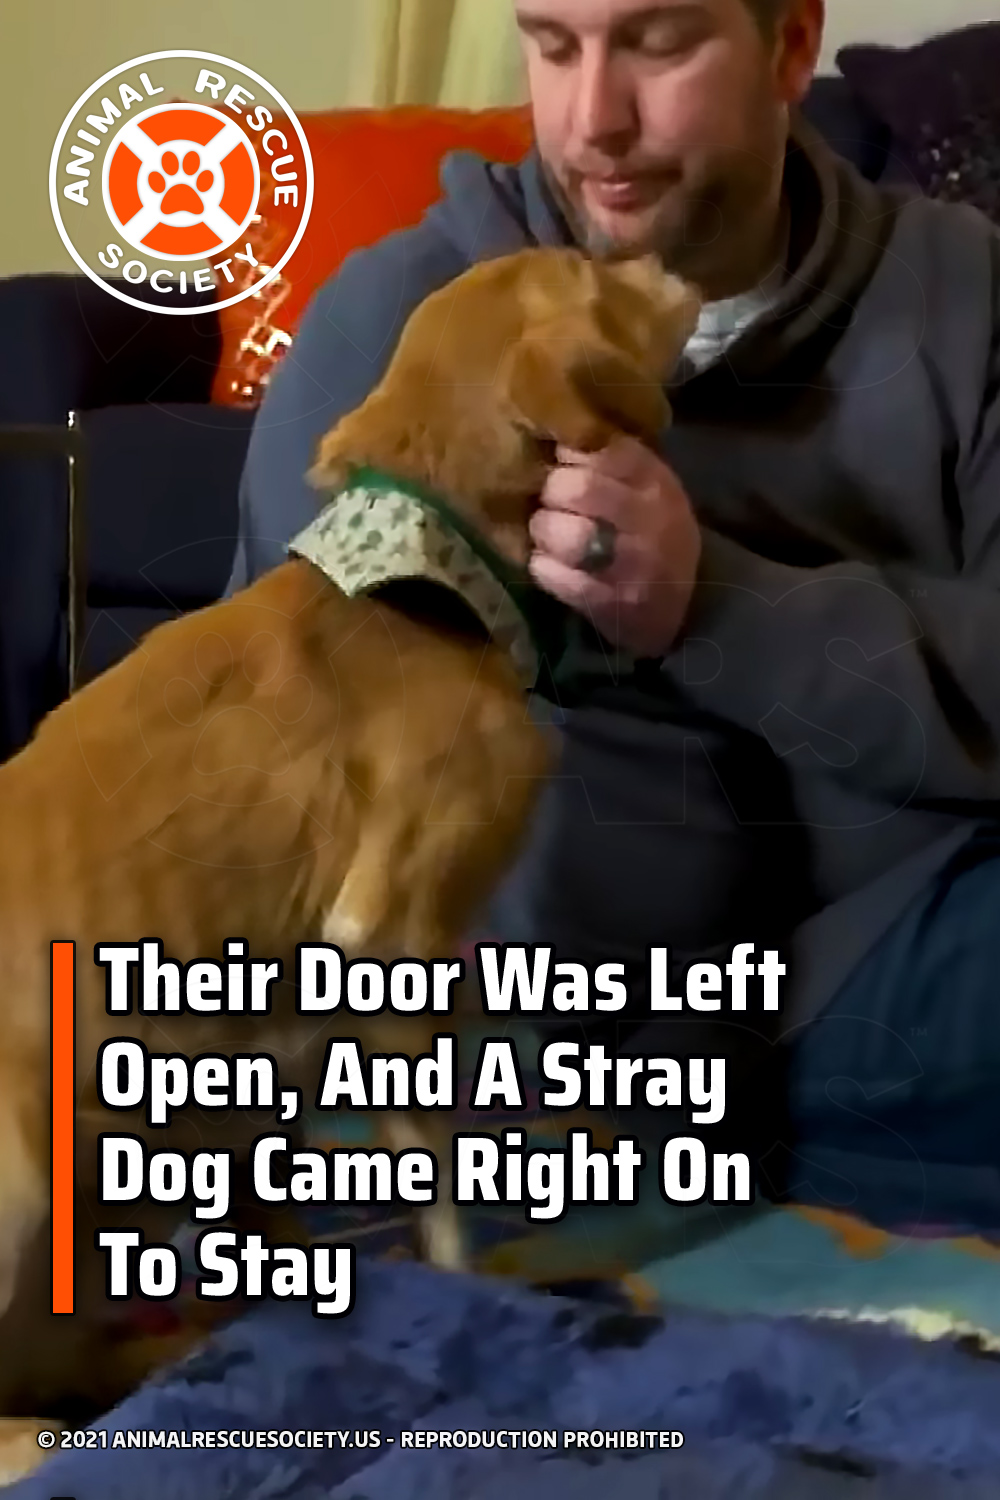 Their Door Was Left Open, And A Stray Dog Came Right On To Stay